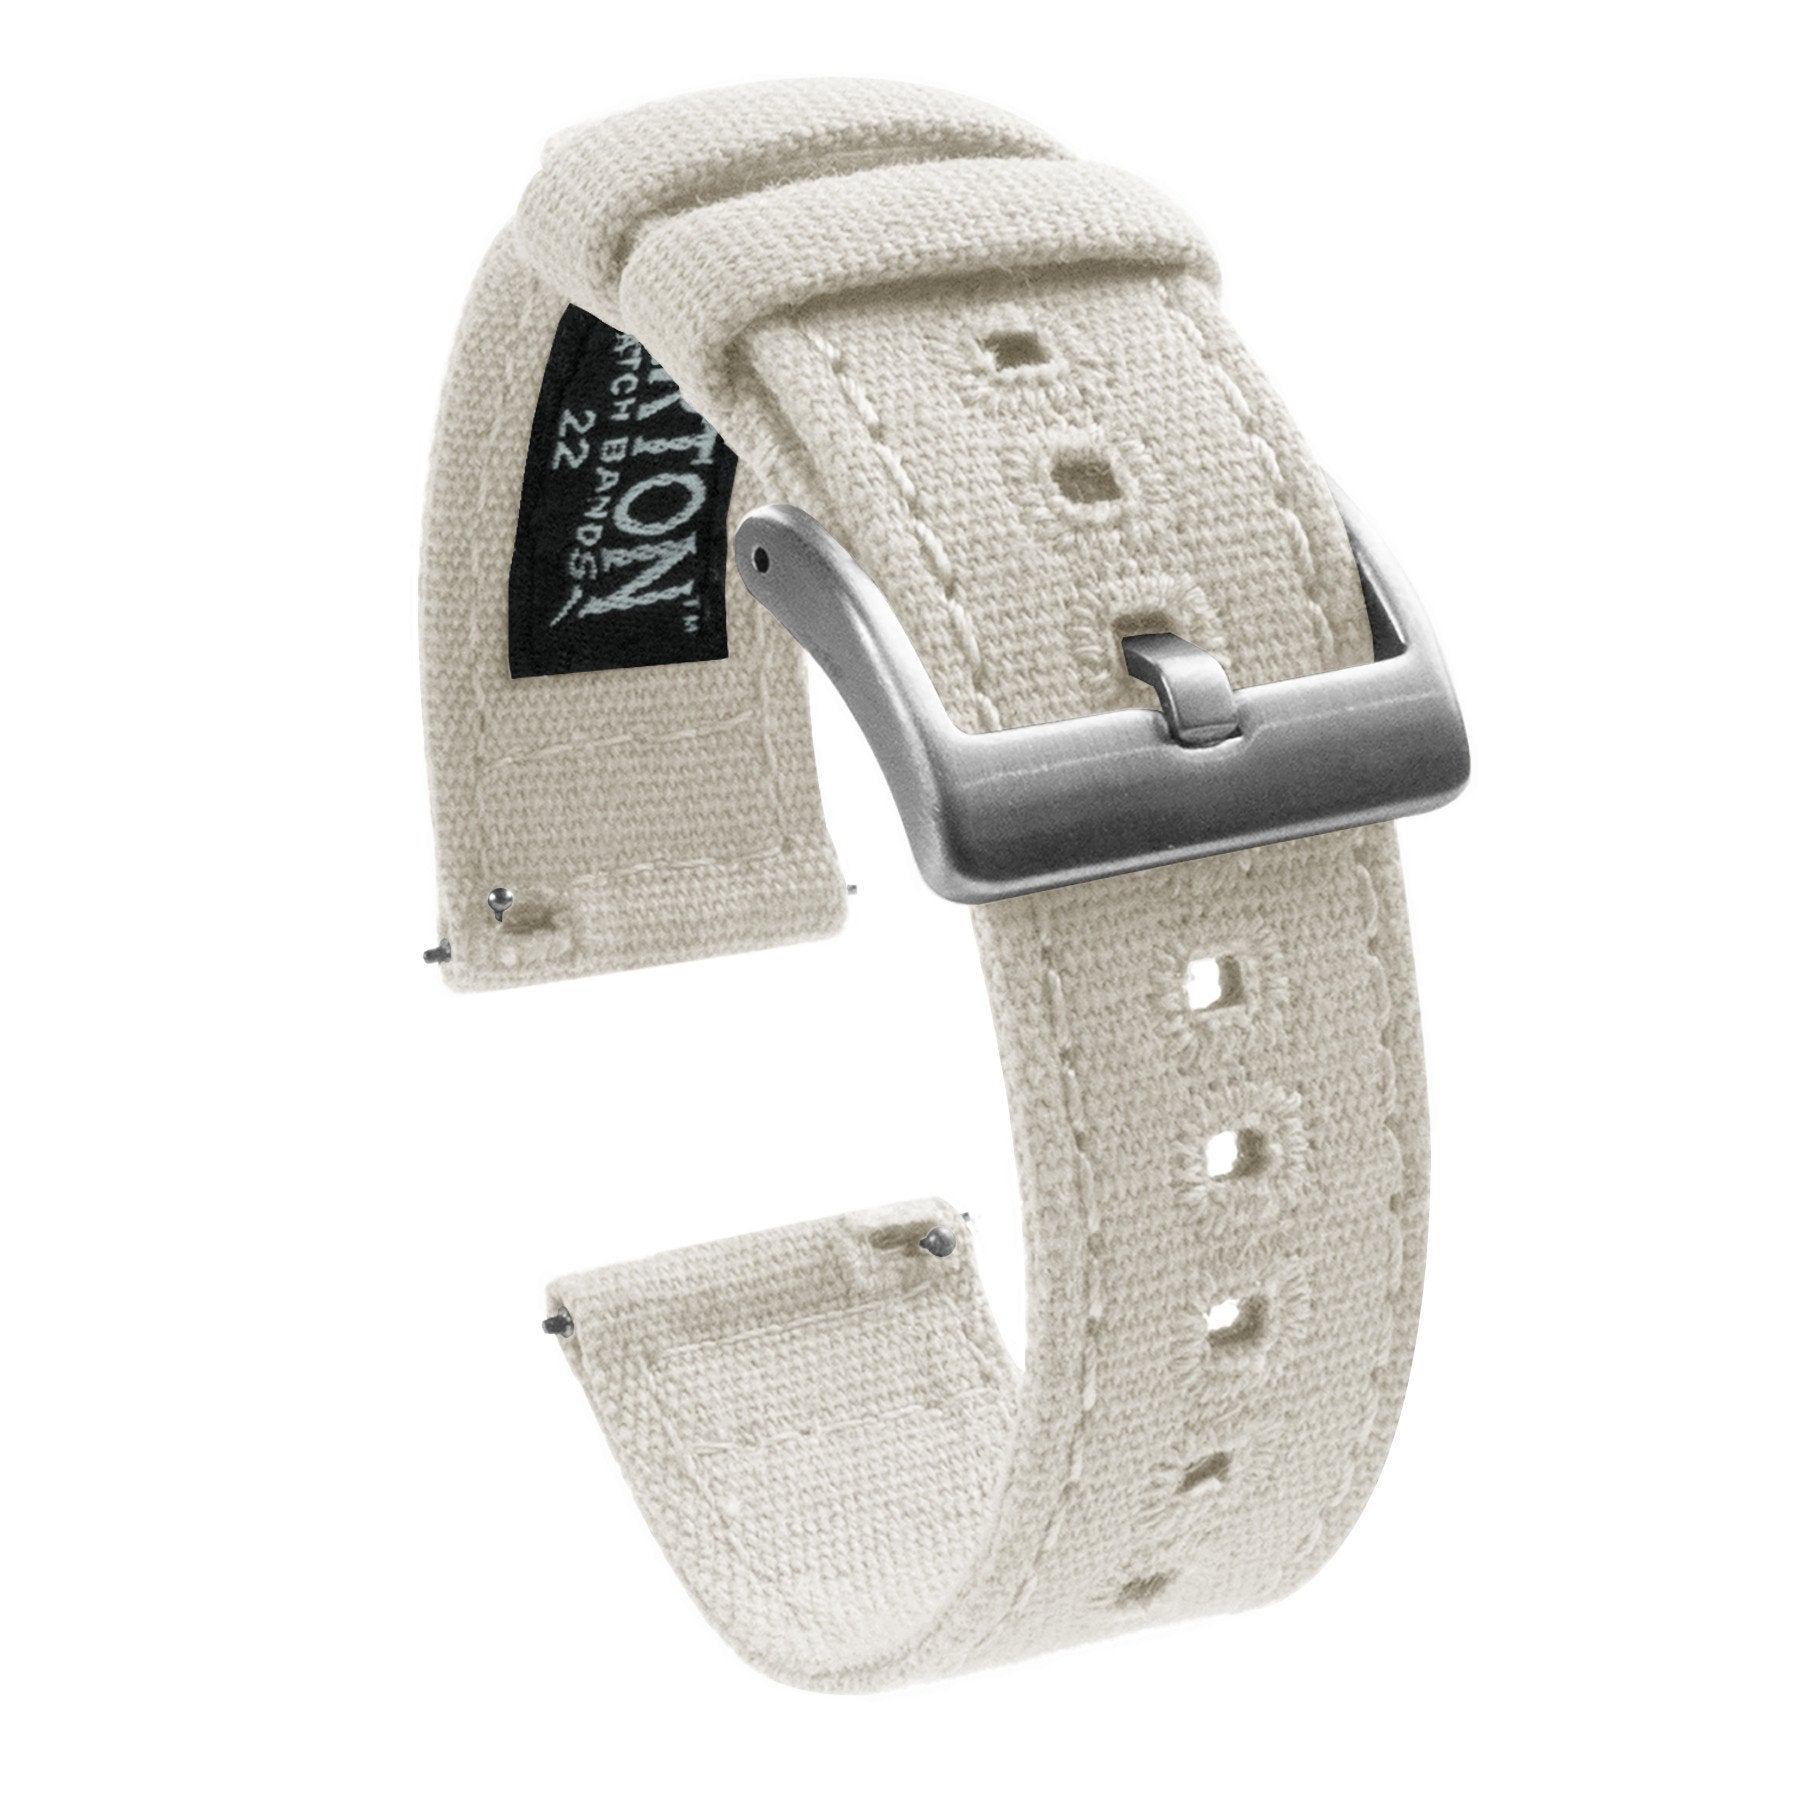 21mm White - Barton Canvas Quick Release Watch Band Straps - Choose Color & Width - 18mm, 19mm, 20mm, 21mm, 22mm, or 23mm